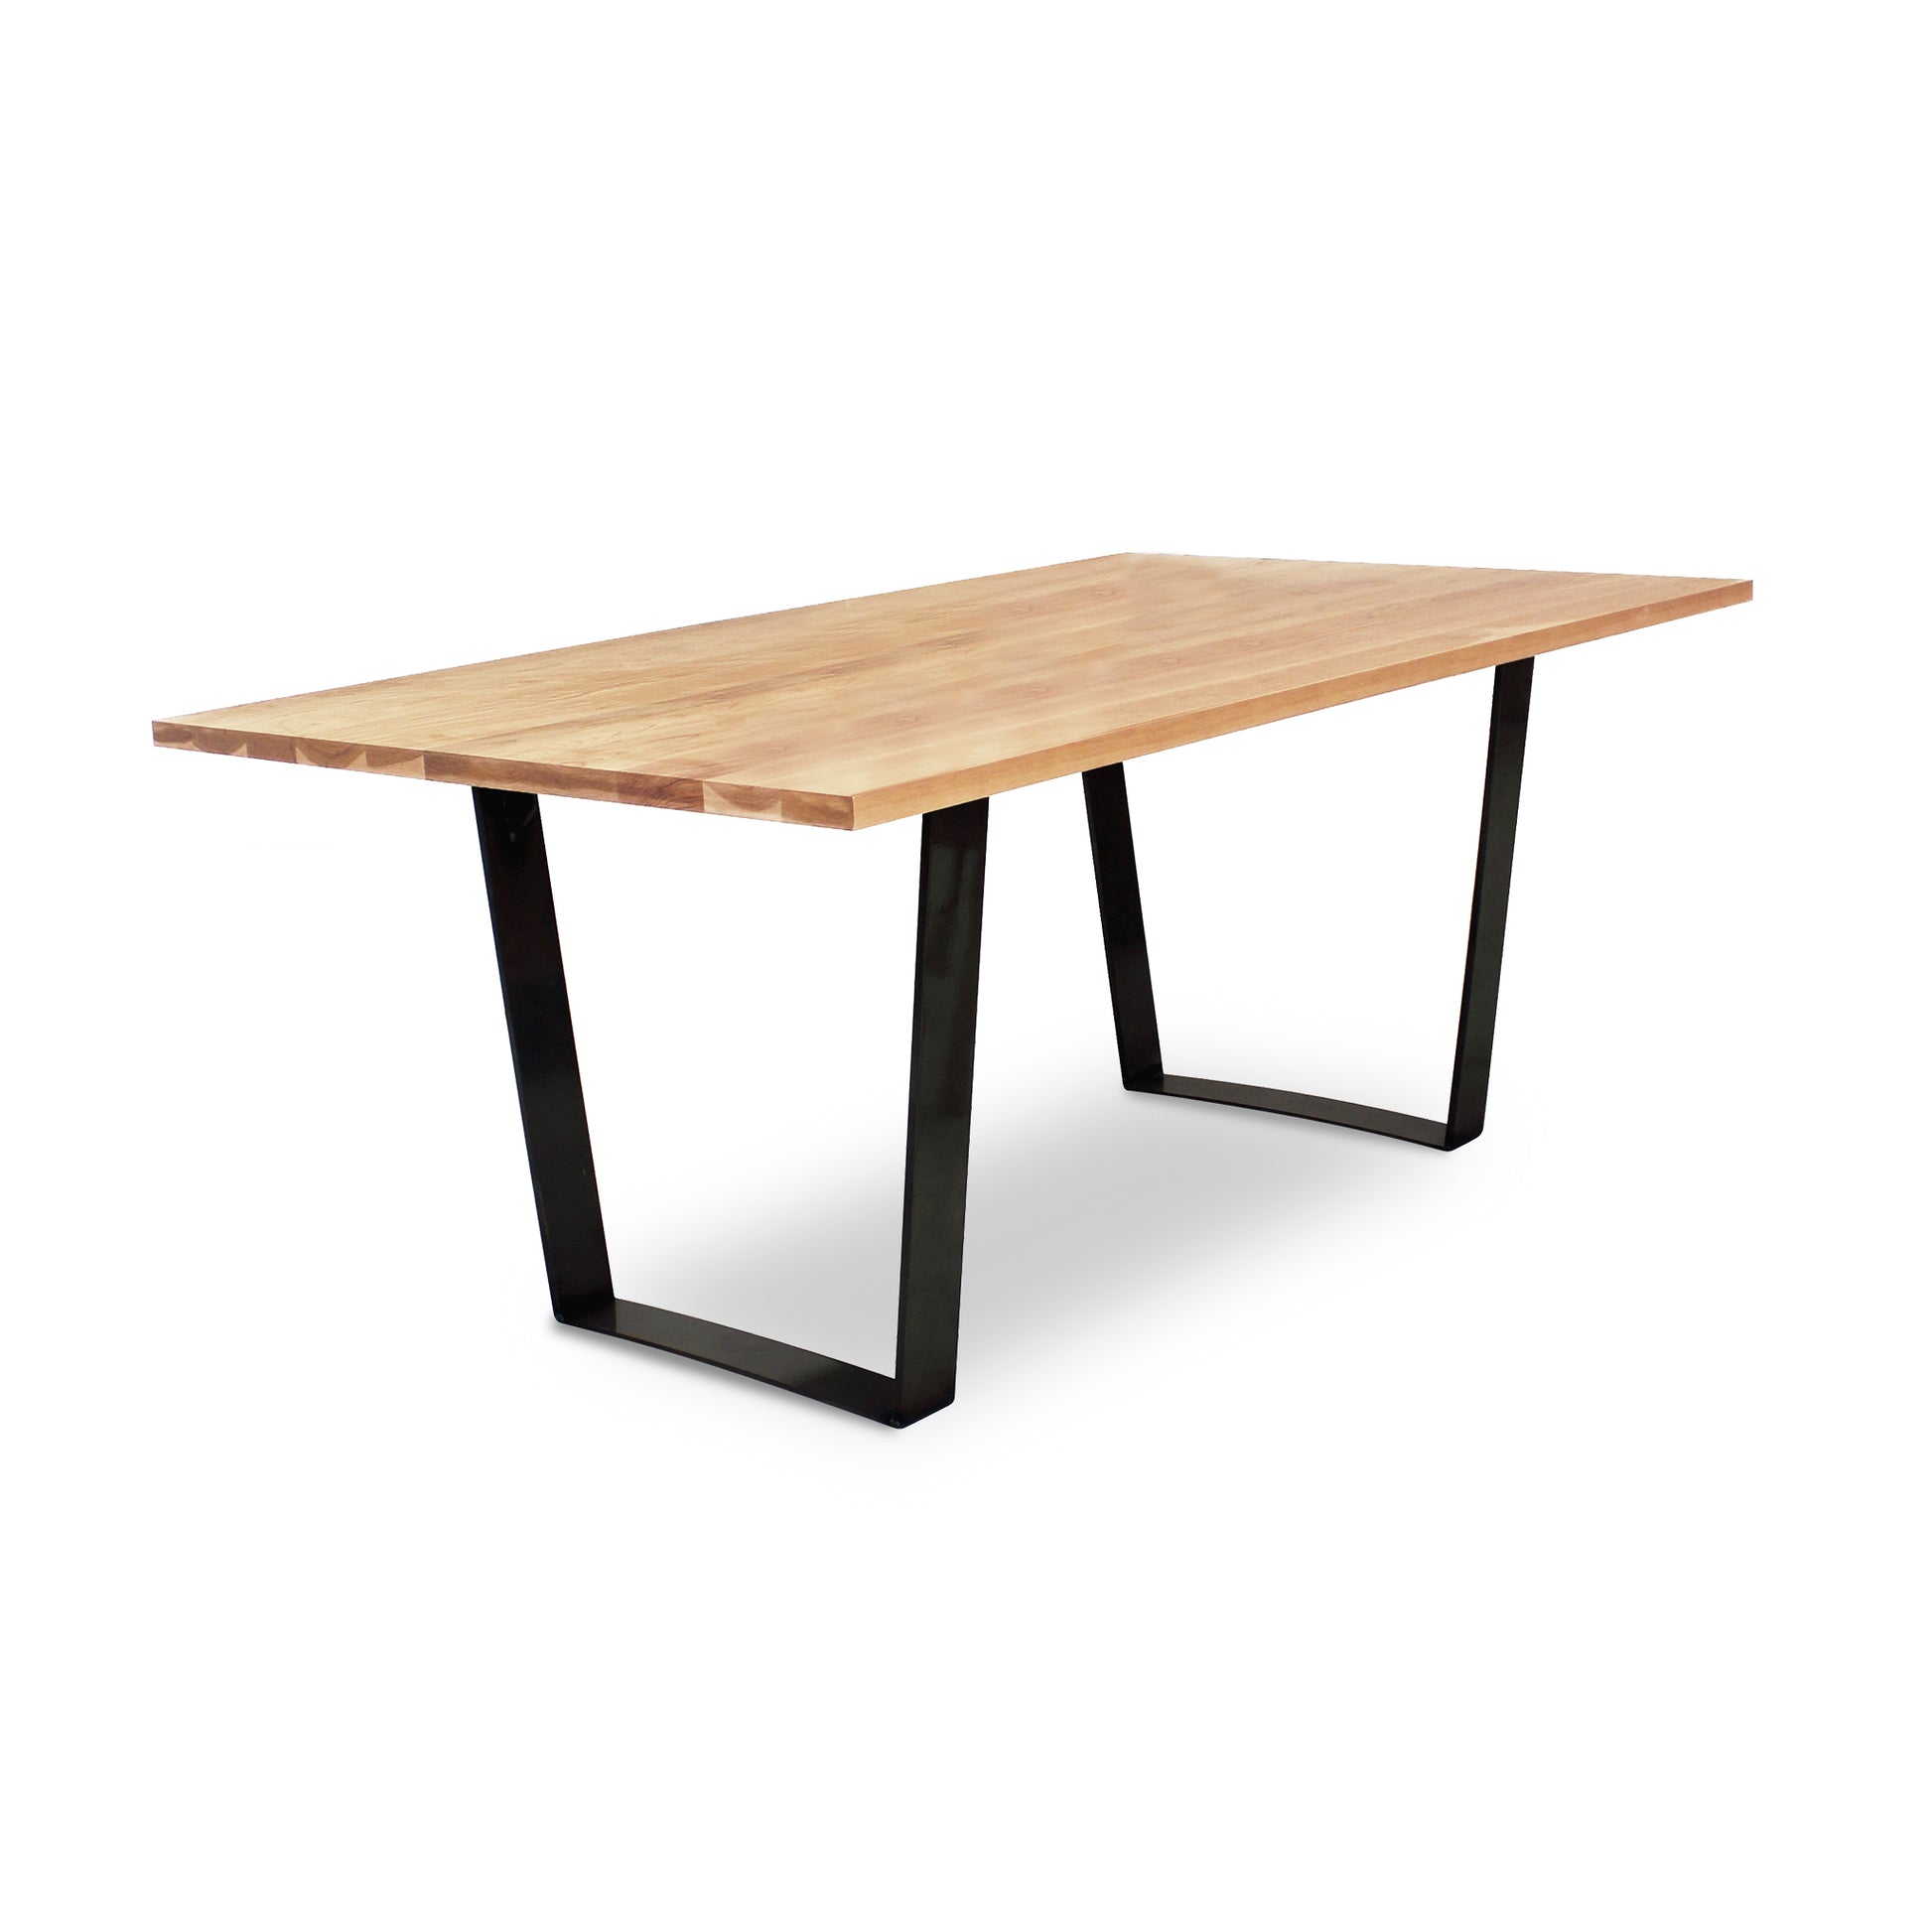 A high-quality Metropolitan Solid Top Dining Table by Lyndon Furniture with a metal base and a wooden top.